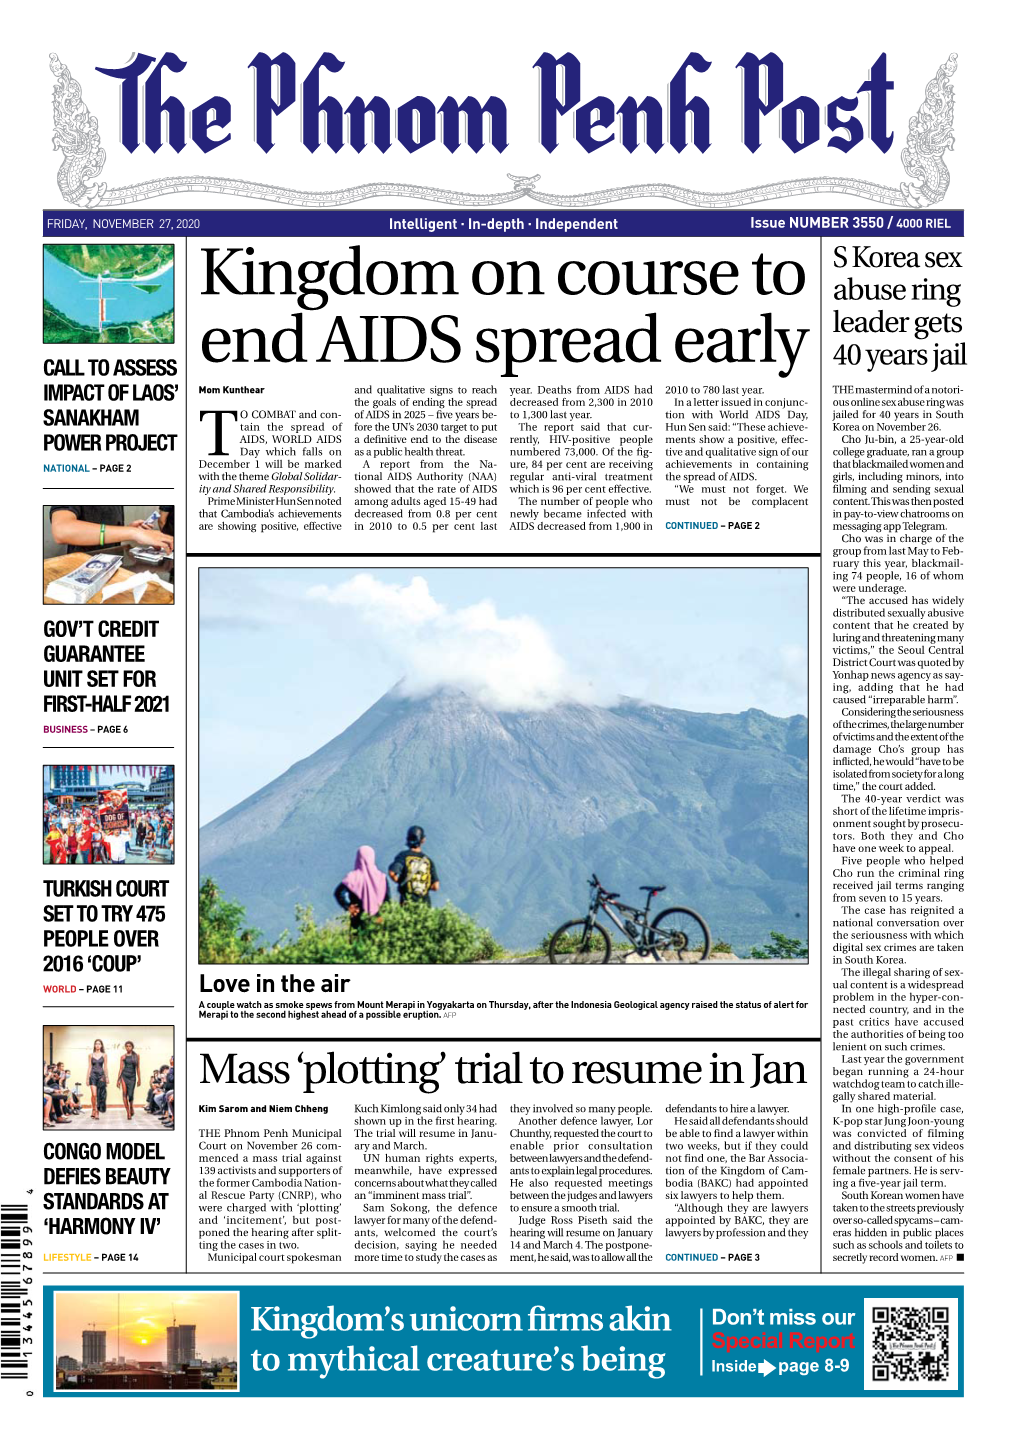 Kingdom on Course to End AIDS Spread Early